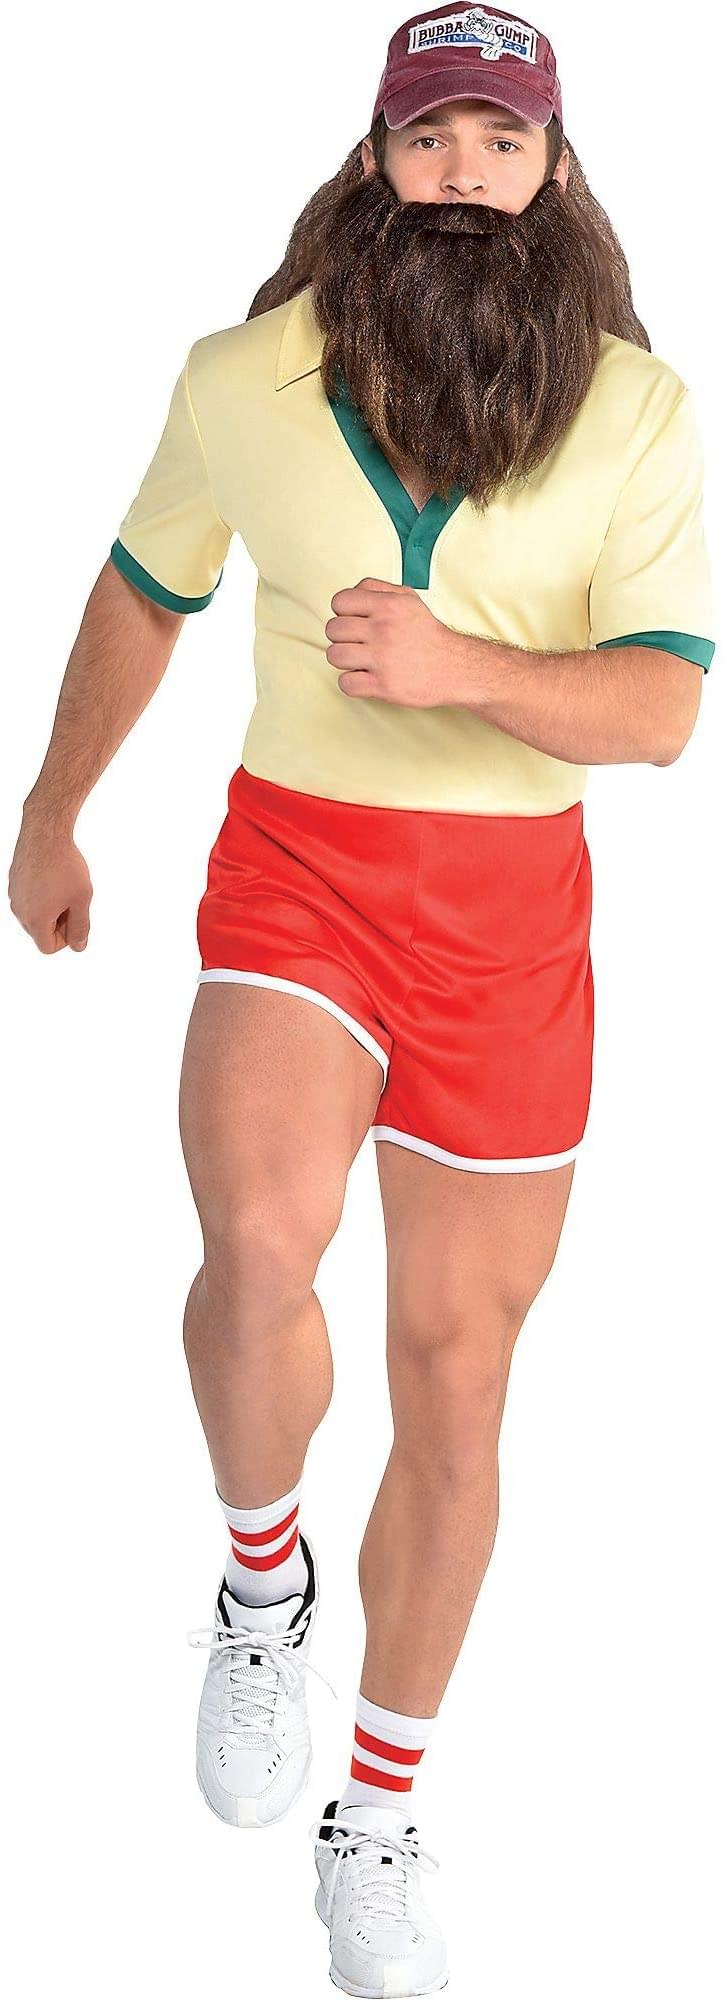 Forrest Gump Running Adult Costume Kit | One Size